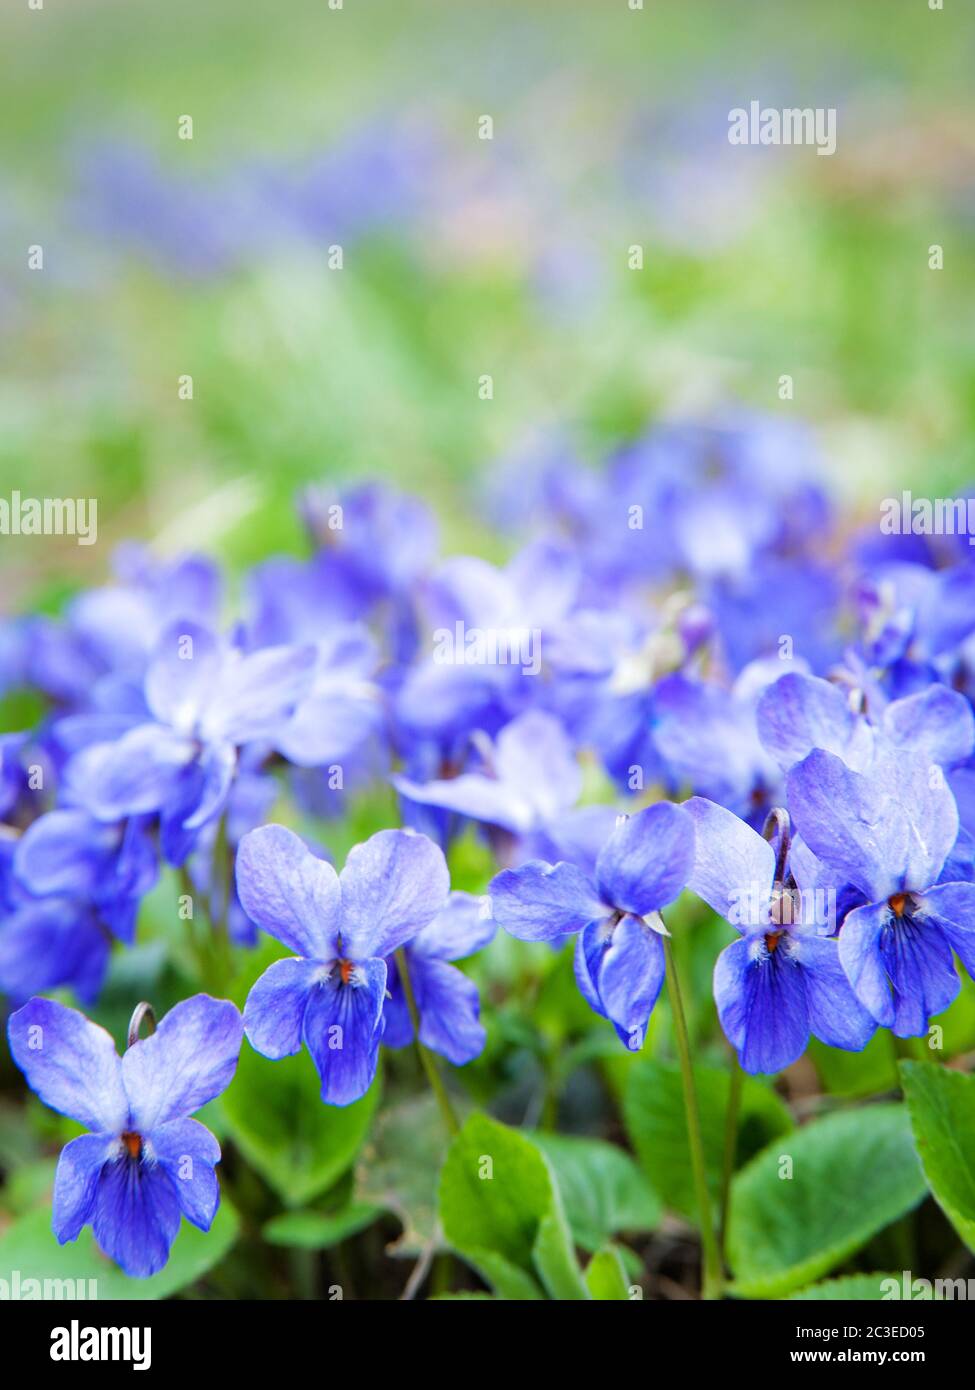 Violets flowers blooming in spring Stock Photo